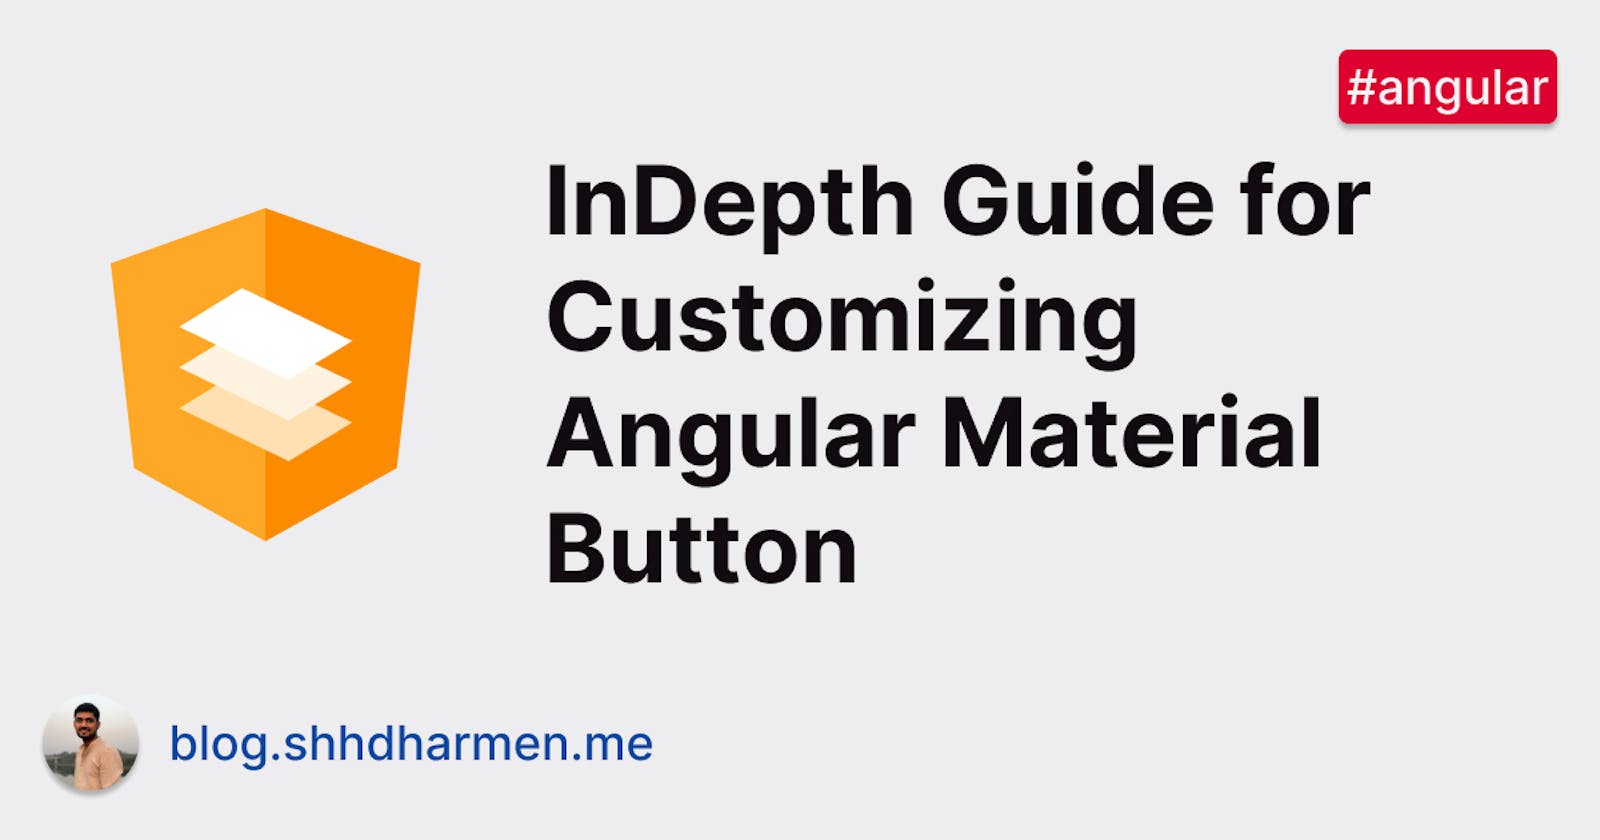 InDepth Guide for Customizing Angular Material Button